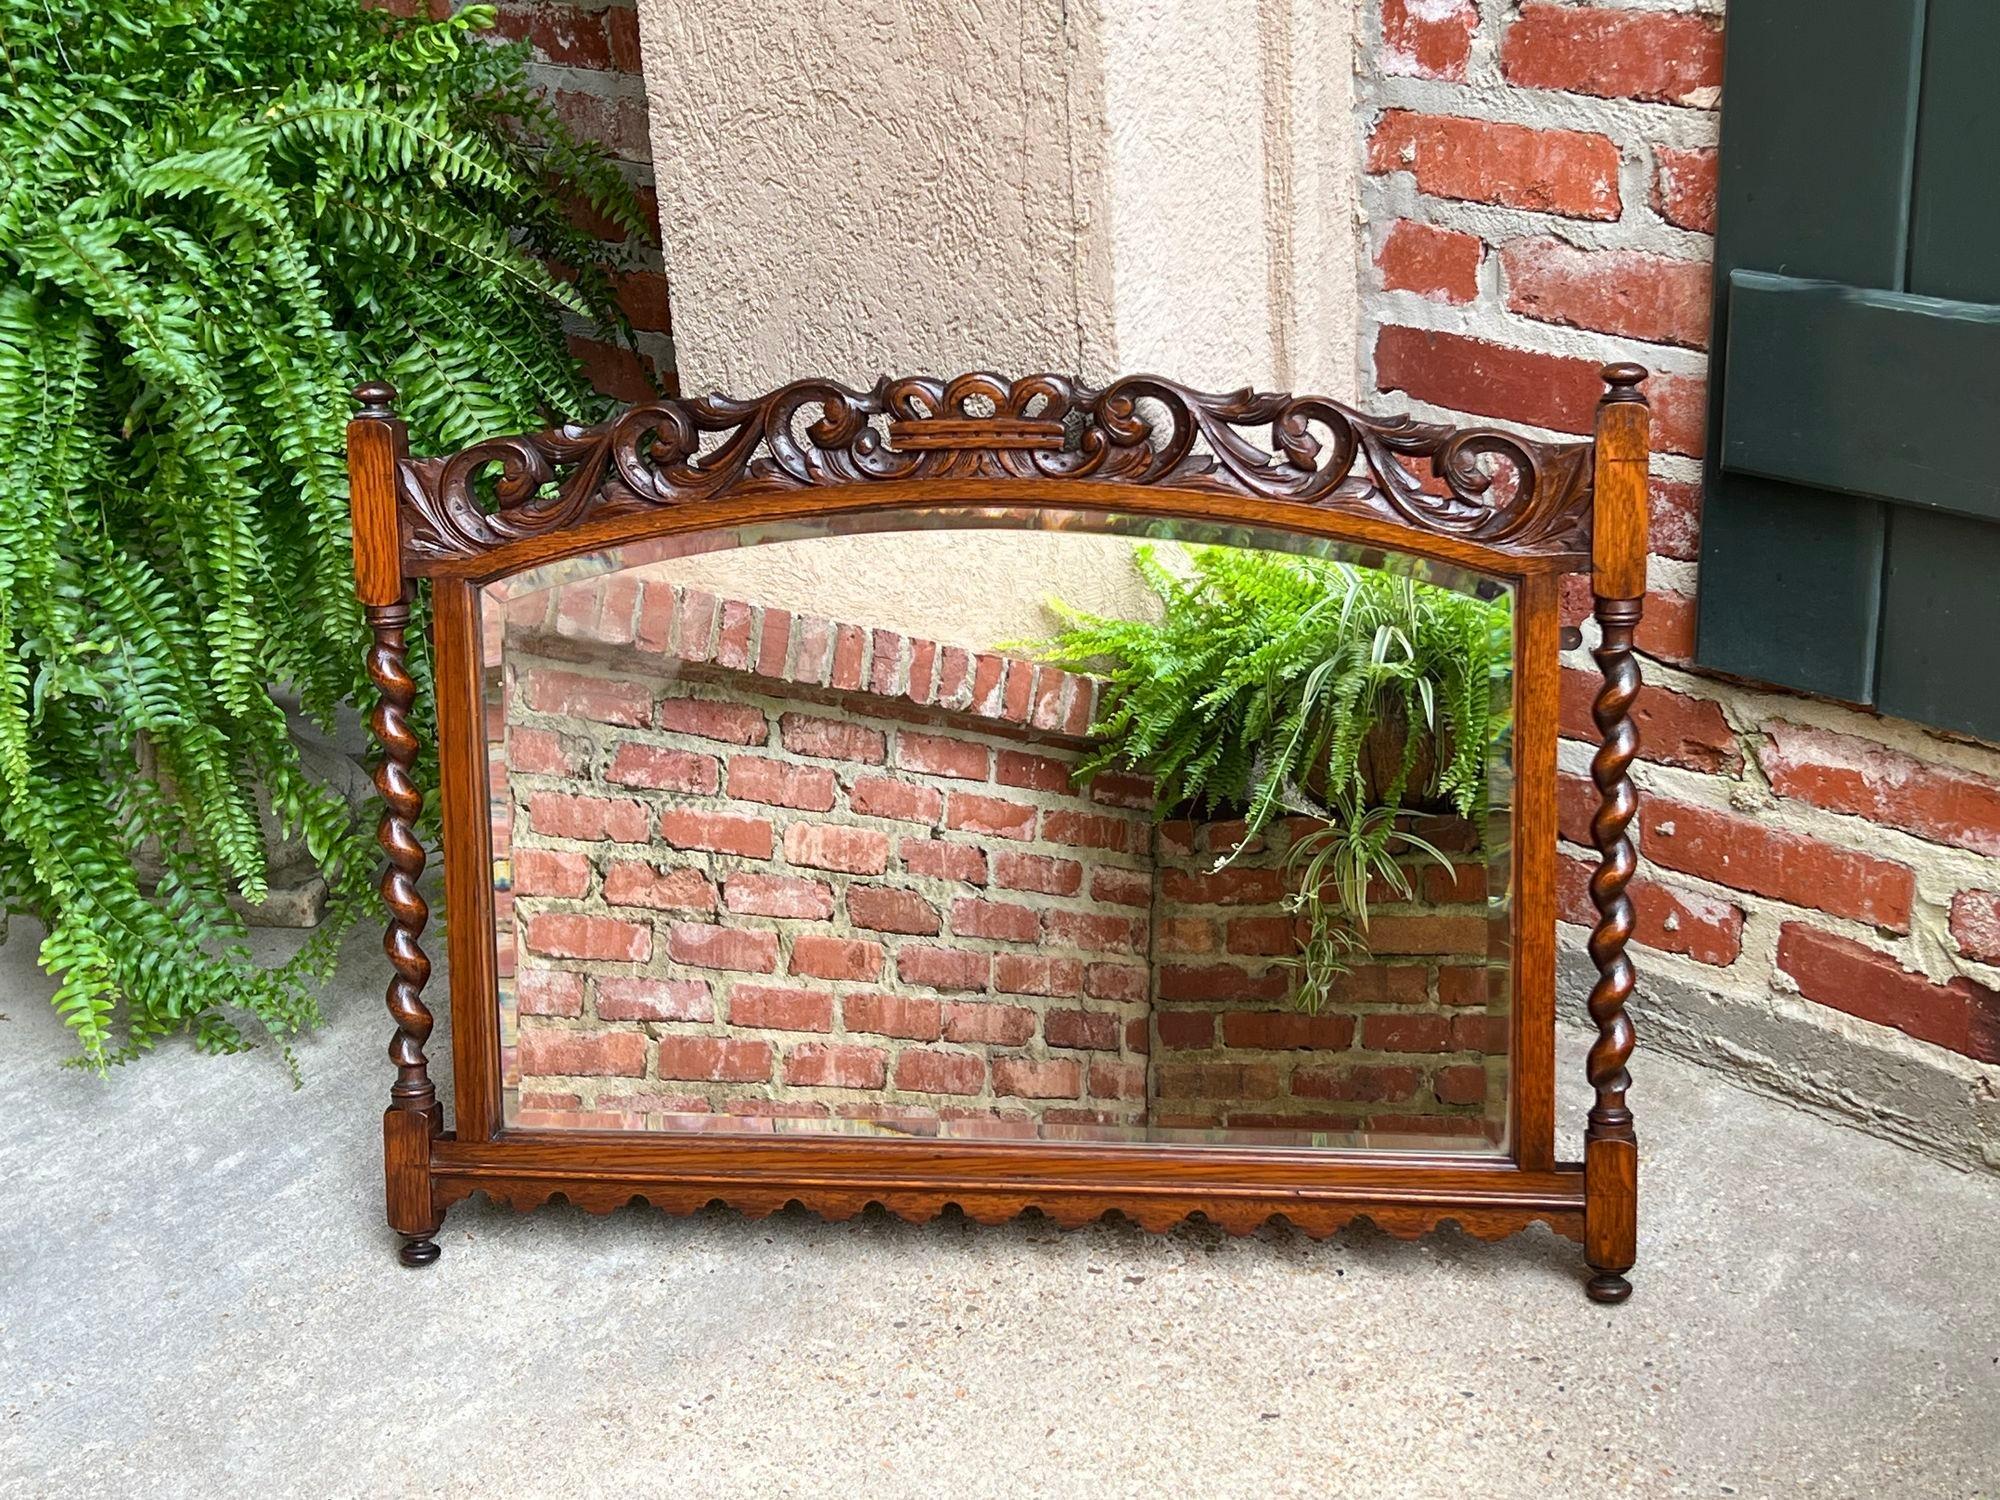 Antique English Carved Oak Wall Mirror Barley Twist Arched Top Frame Jacobean.

Direct from England, another fabulous antique English wall mirror! Elegant arched top features a wide, open carved band with carved center crown.
Barley twist posts to